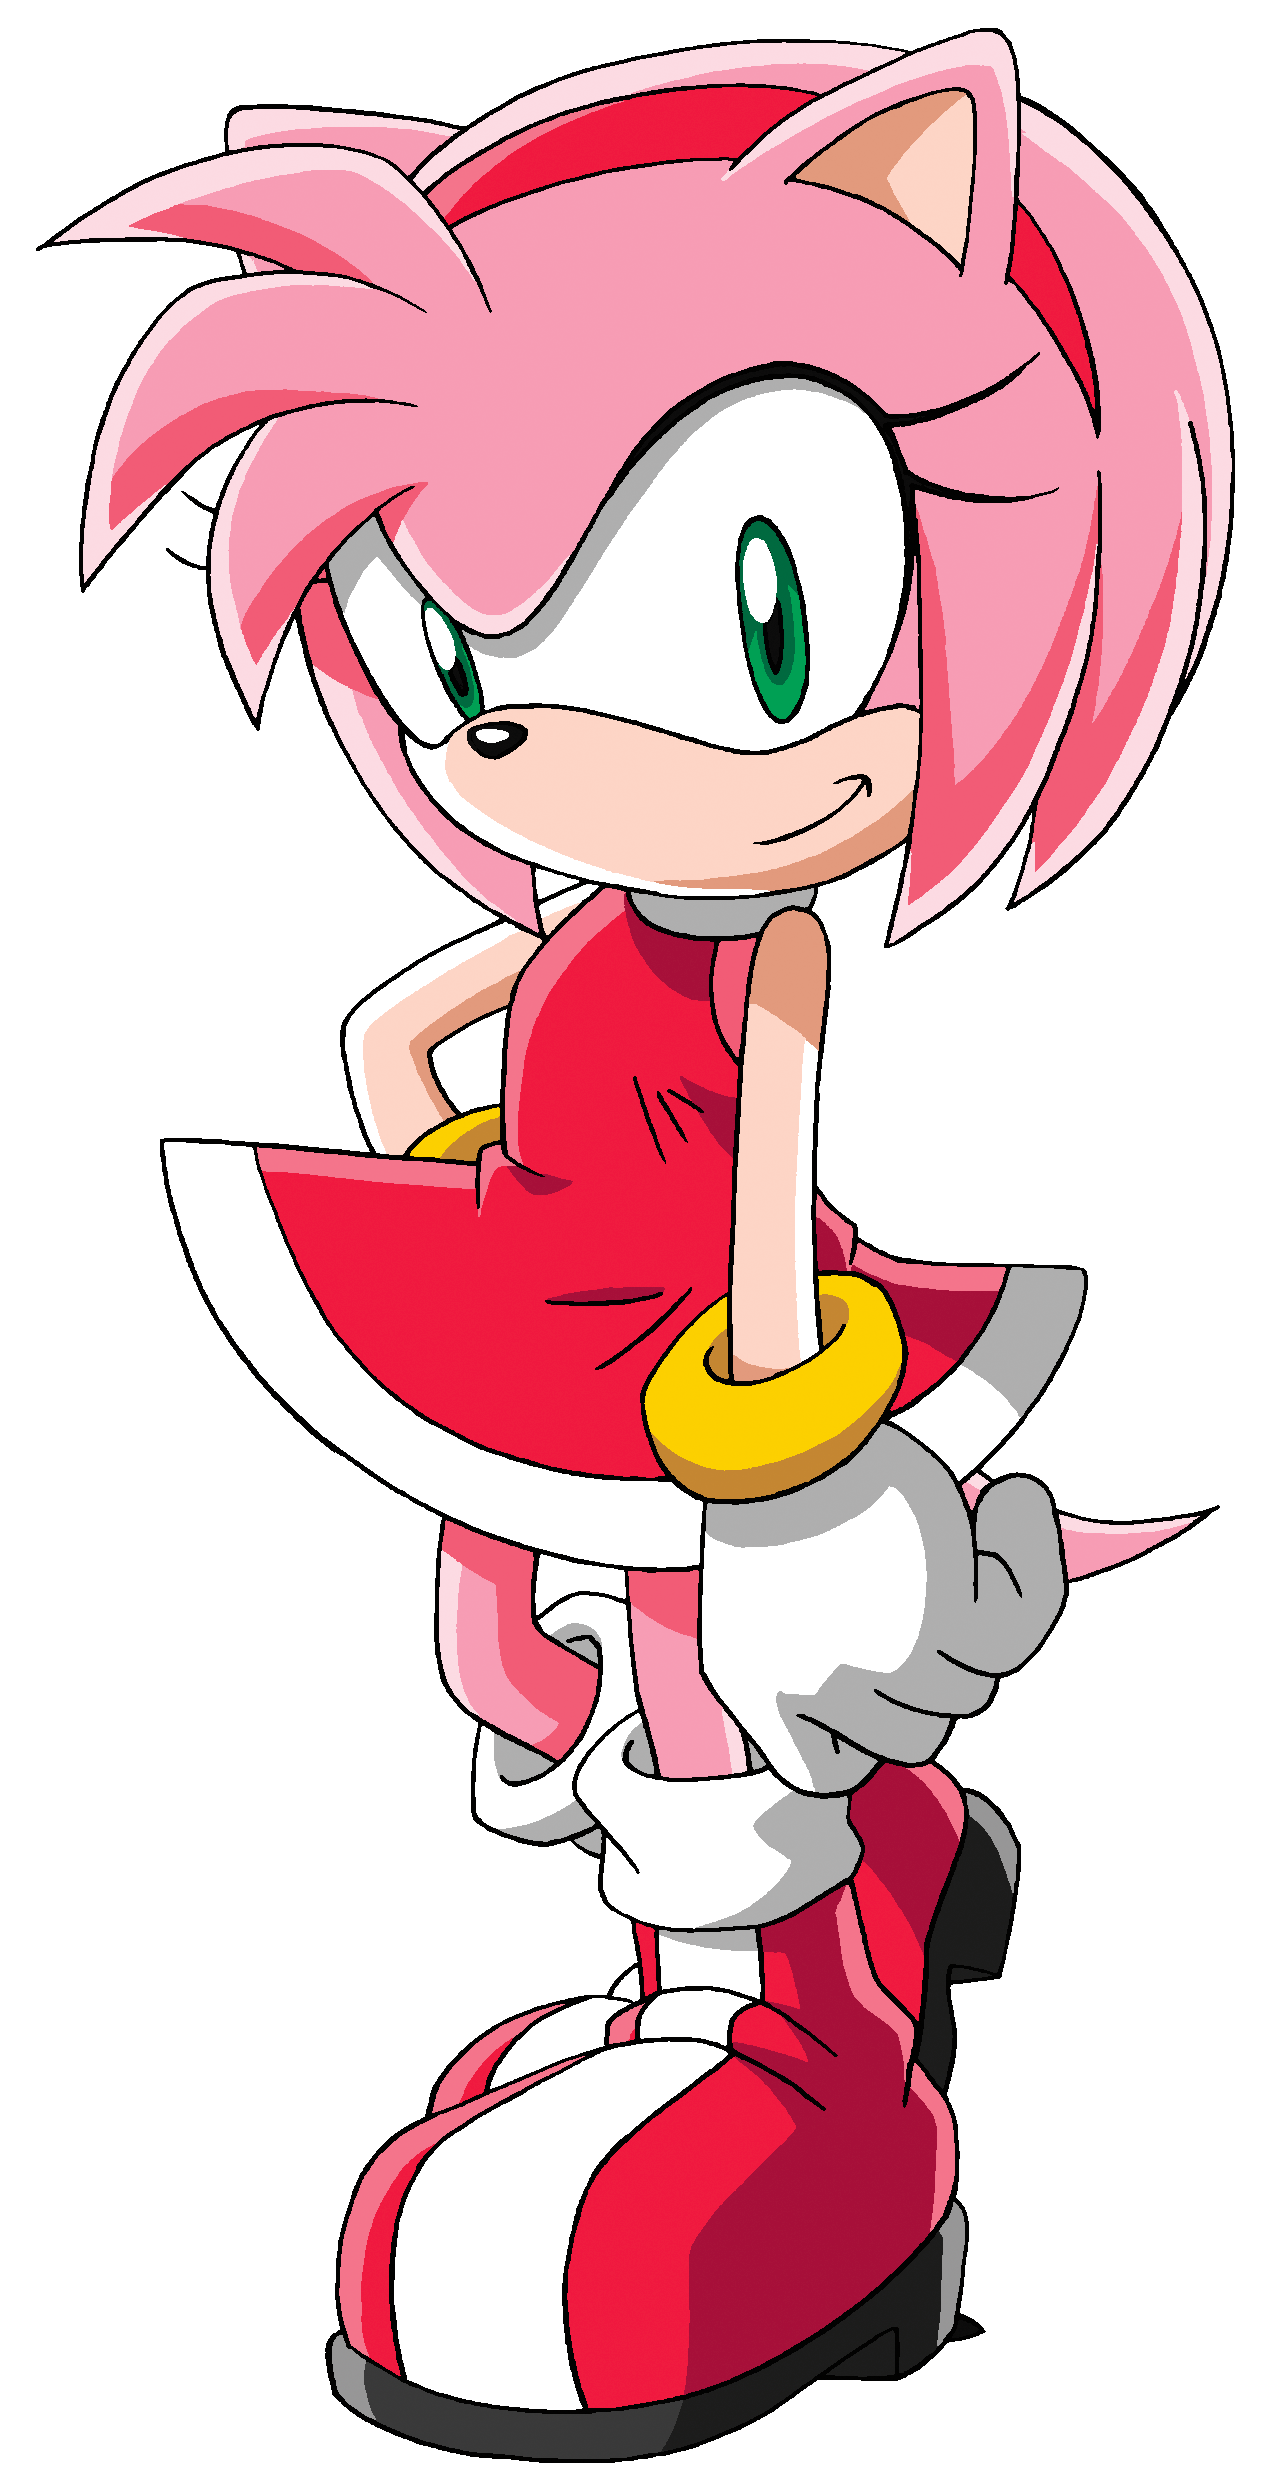 The Infinately Scaleable Amy Rose (SONIC X) by rosyfan12 on DeviantArt